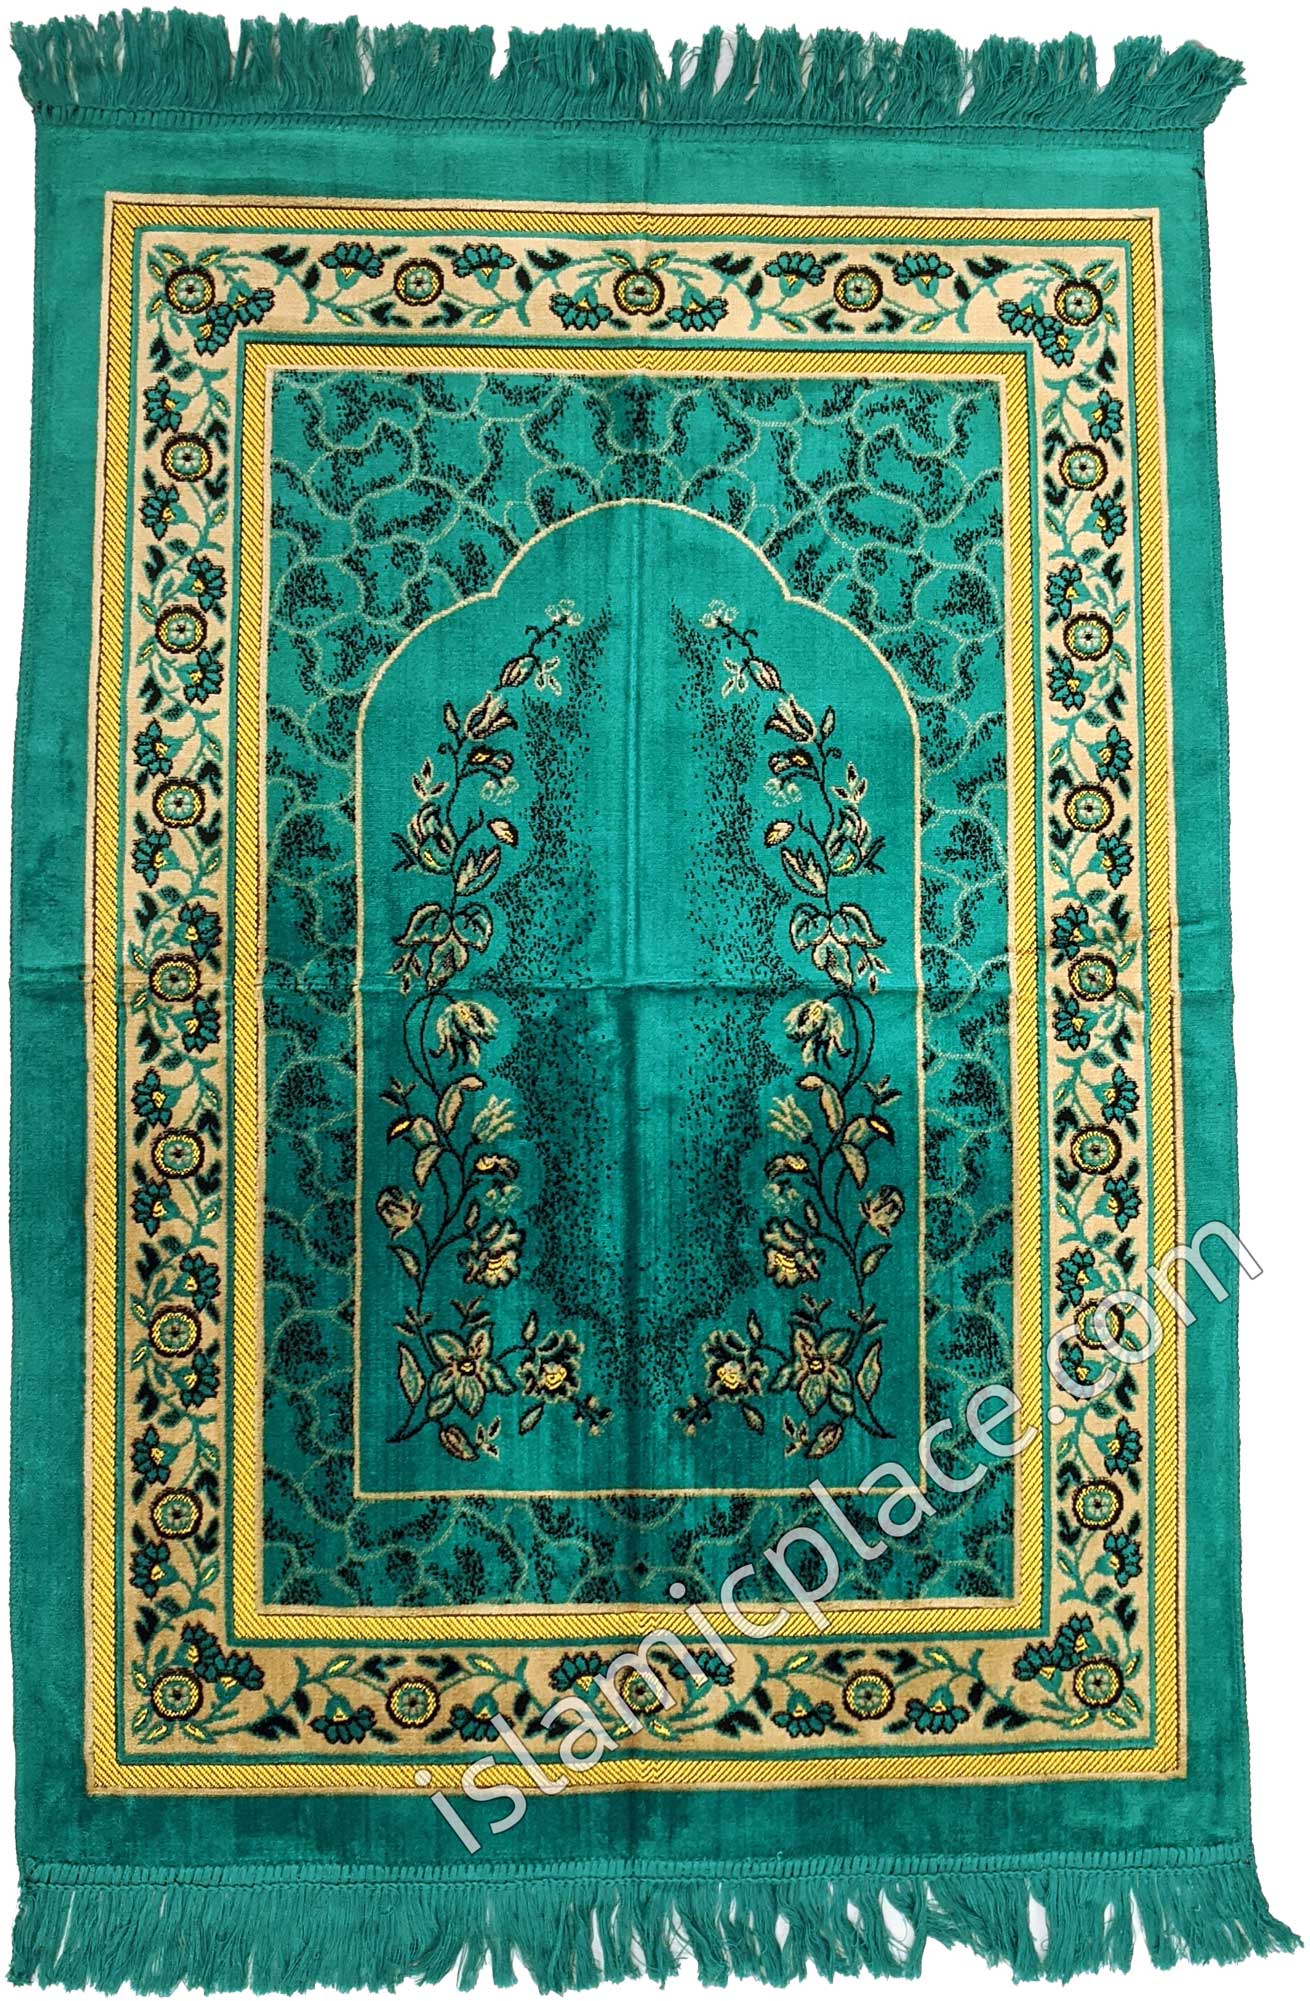 Turquoise, Tan and Gold Prayer Rug With Garden Mihrab (Big & Tall size)